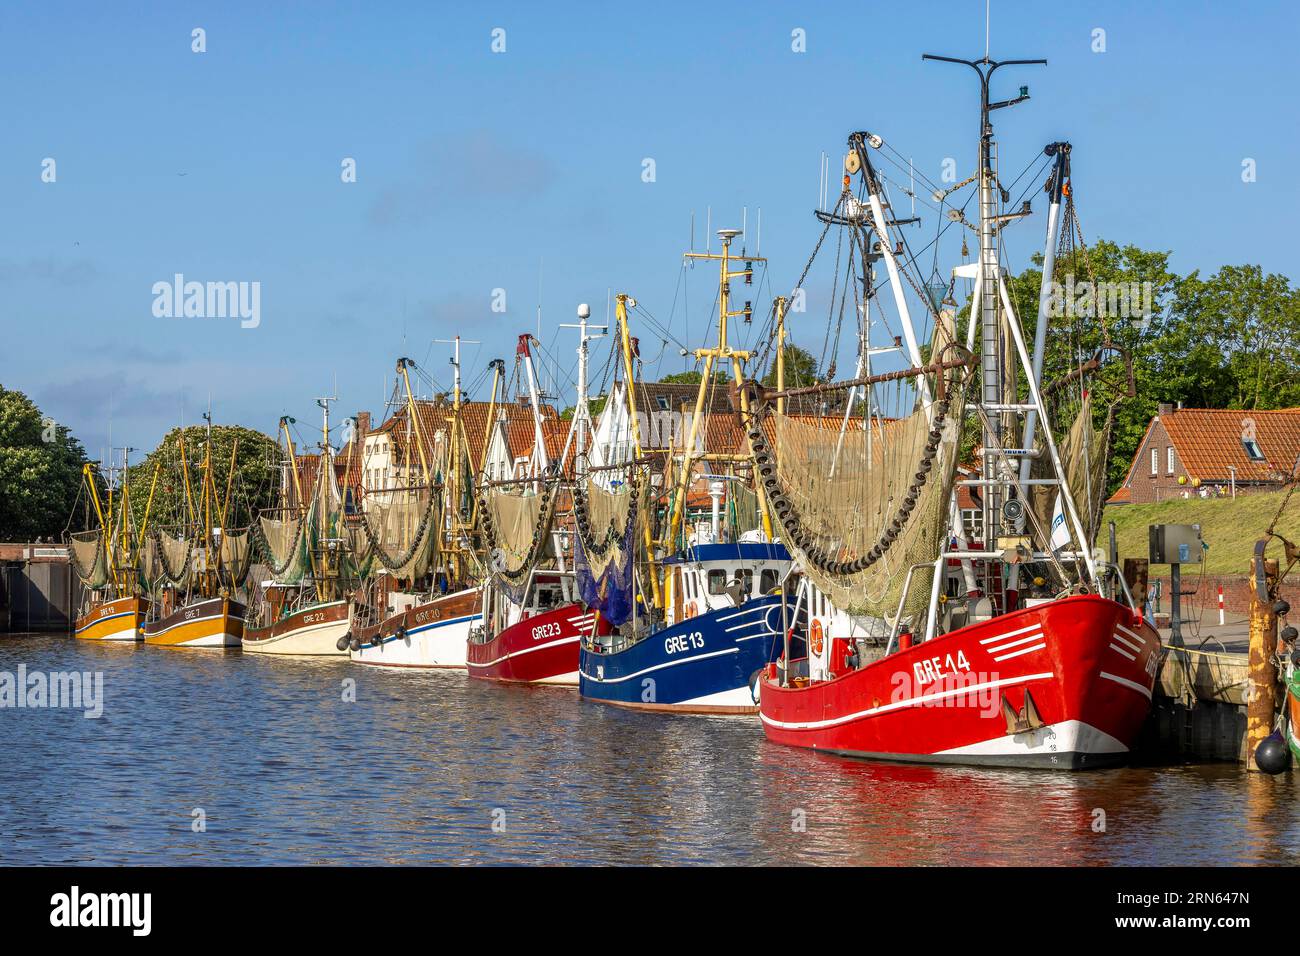 Crab cutter with crab net in the harbour of Greetsiel, Greetsiel, East Frisia, North Sea, Lower Saxony, Germany Stock Photo